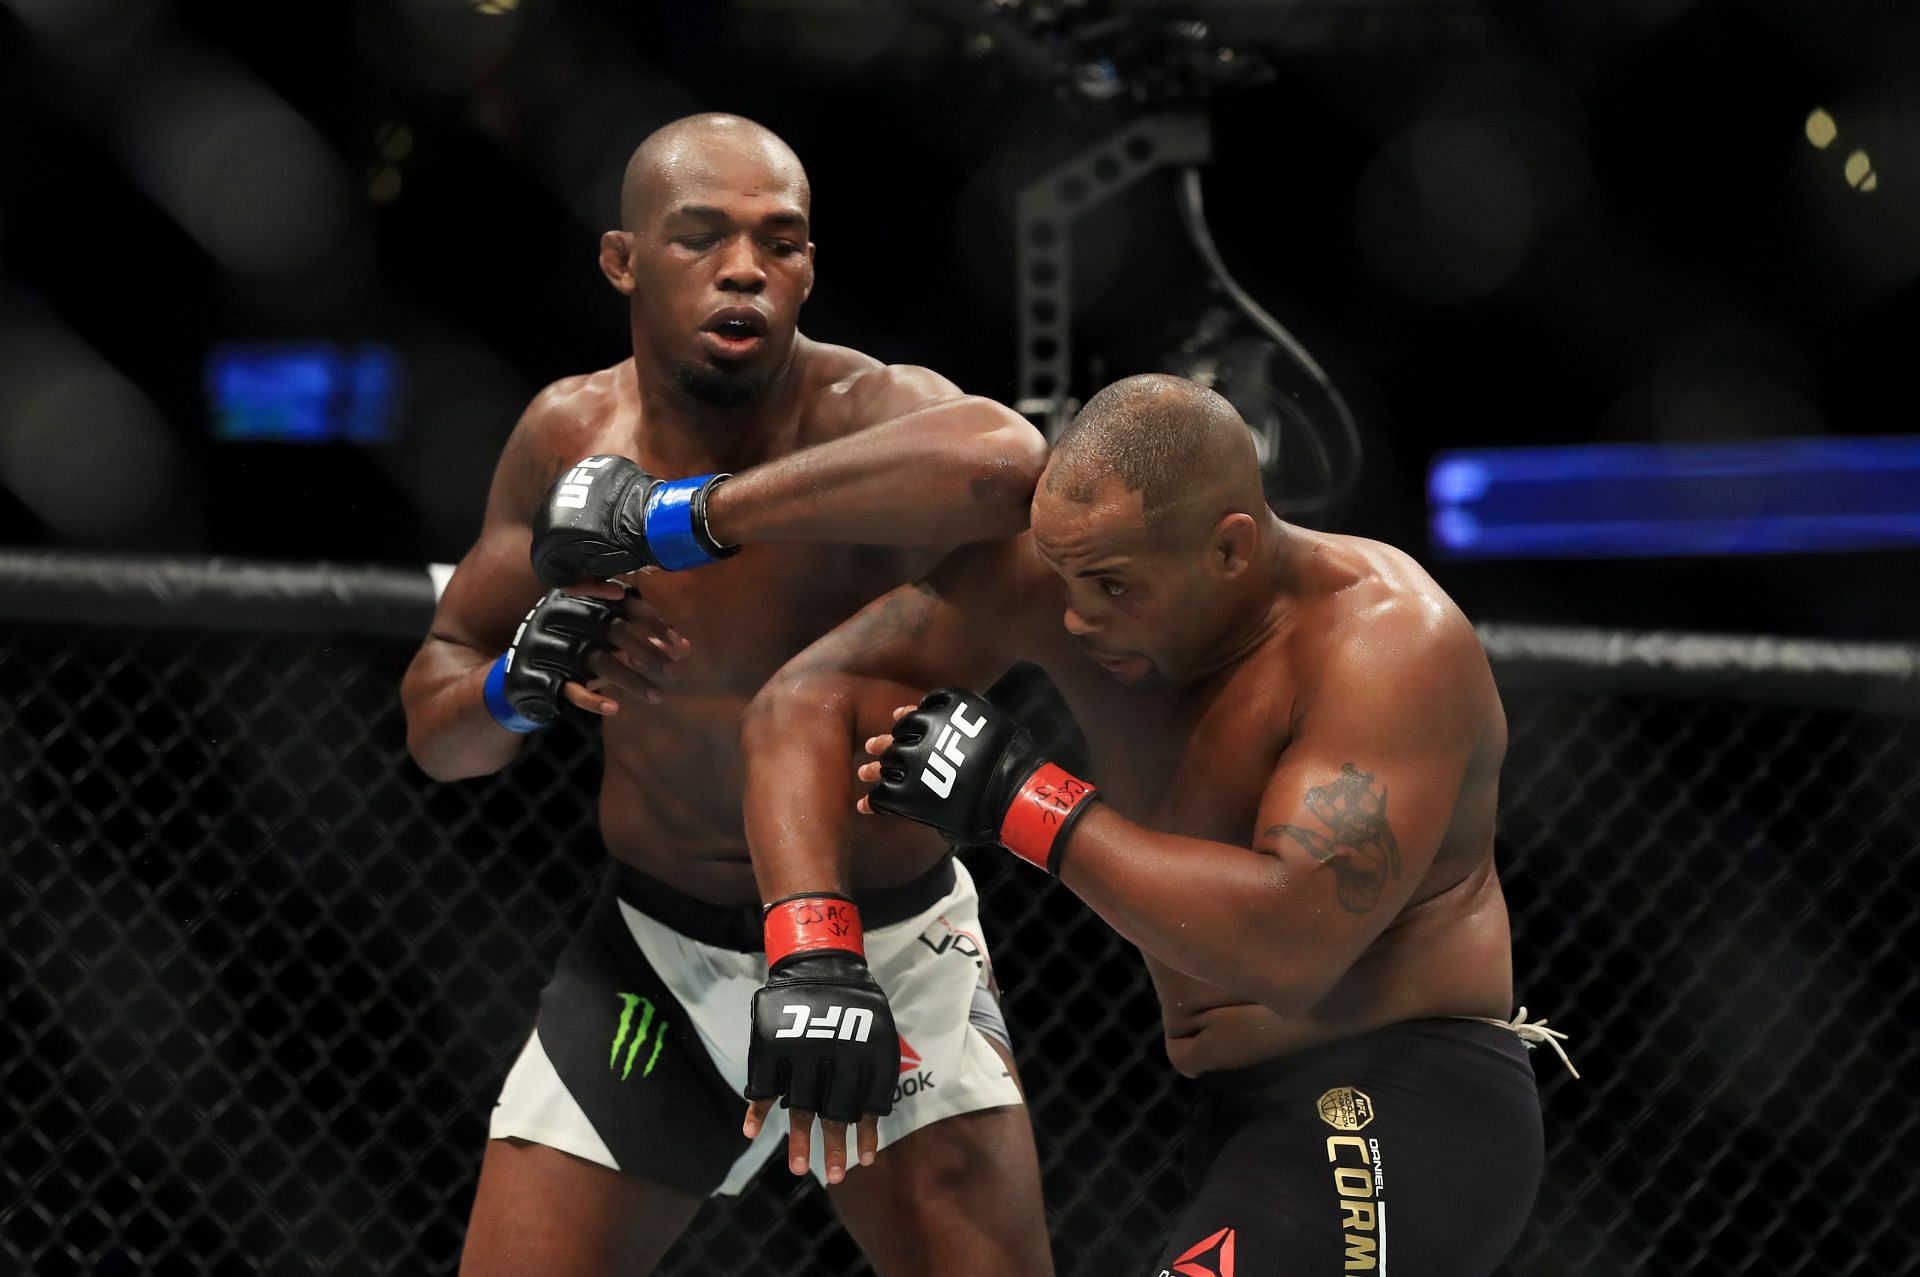 Jon Jones defeated his great rival Daniel Cormier on two occasions